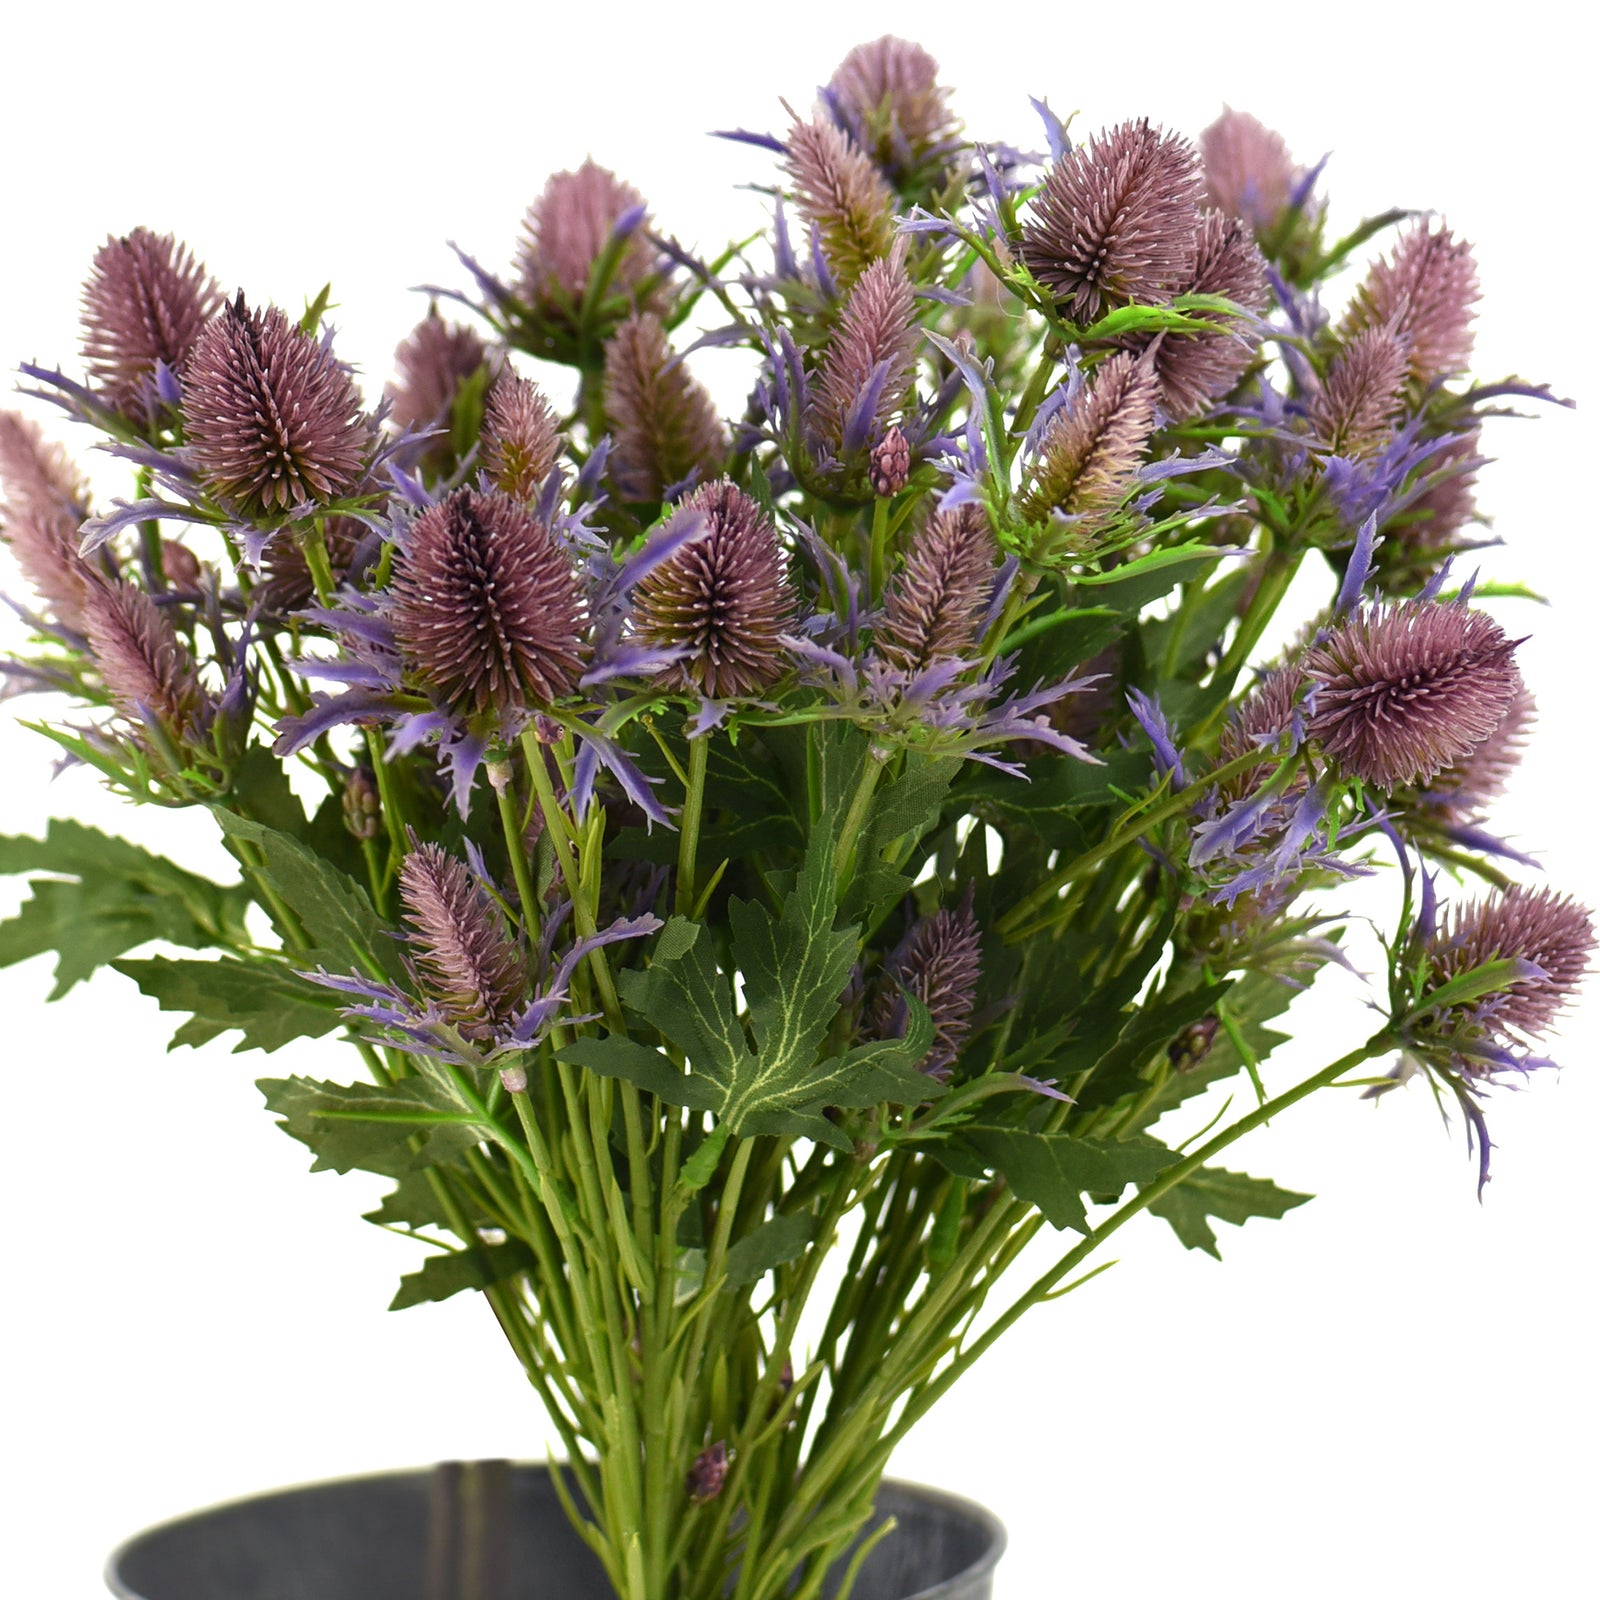 Real Size Artificial Real Touch Eryngium (Sea Holly) Purple Thistles (5 Stems)